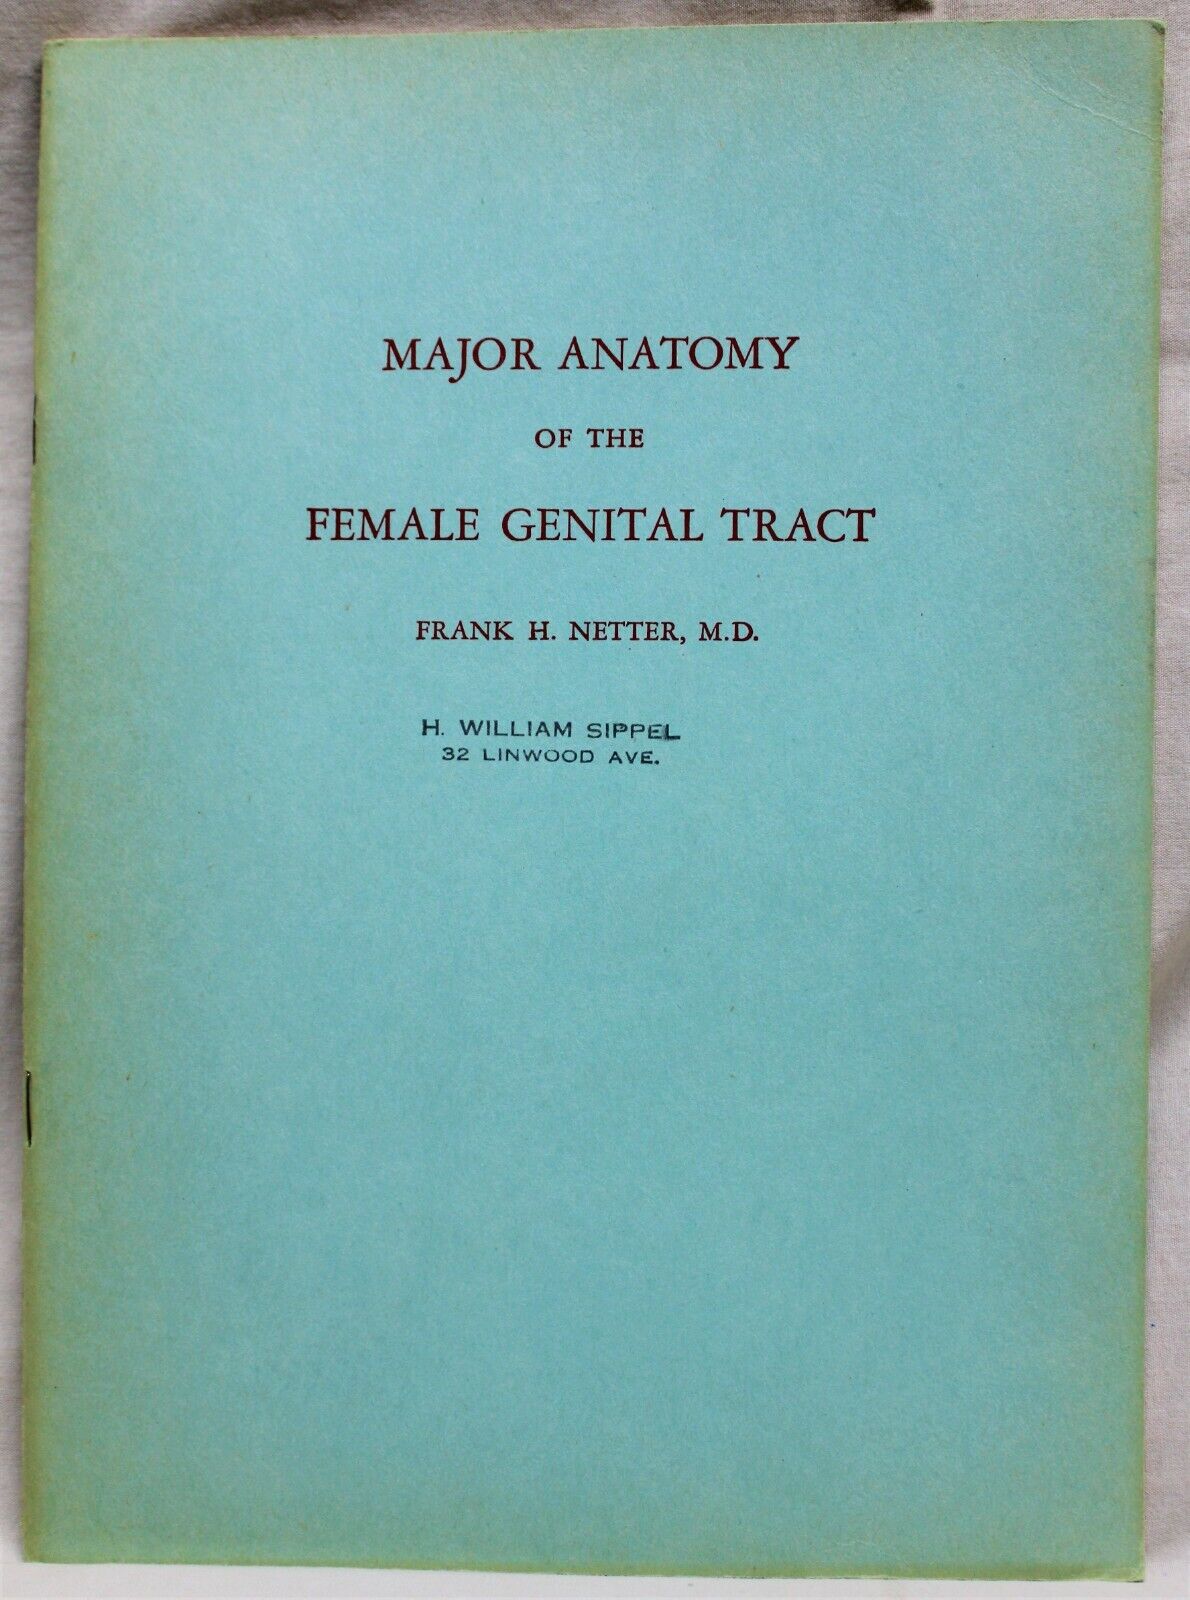 CIBA PHARMACEUTICAL PUBLICATION ANOTOMY OF THE FEMALE GENITAL TRACT 1949 VINTAGE